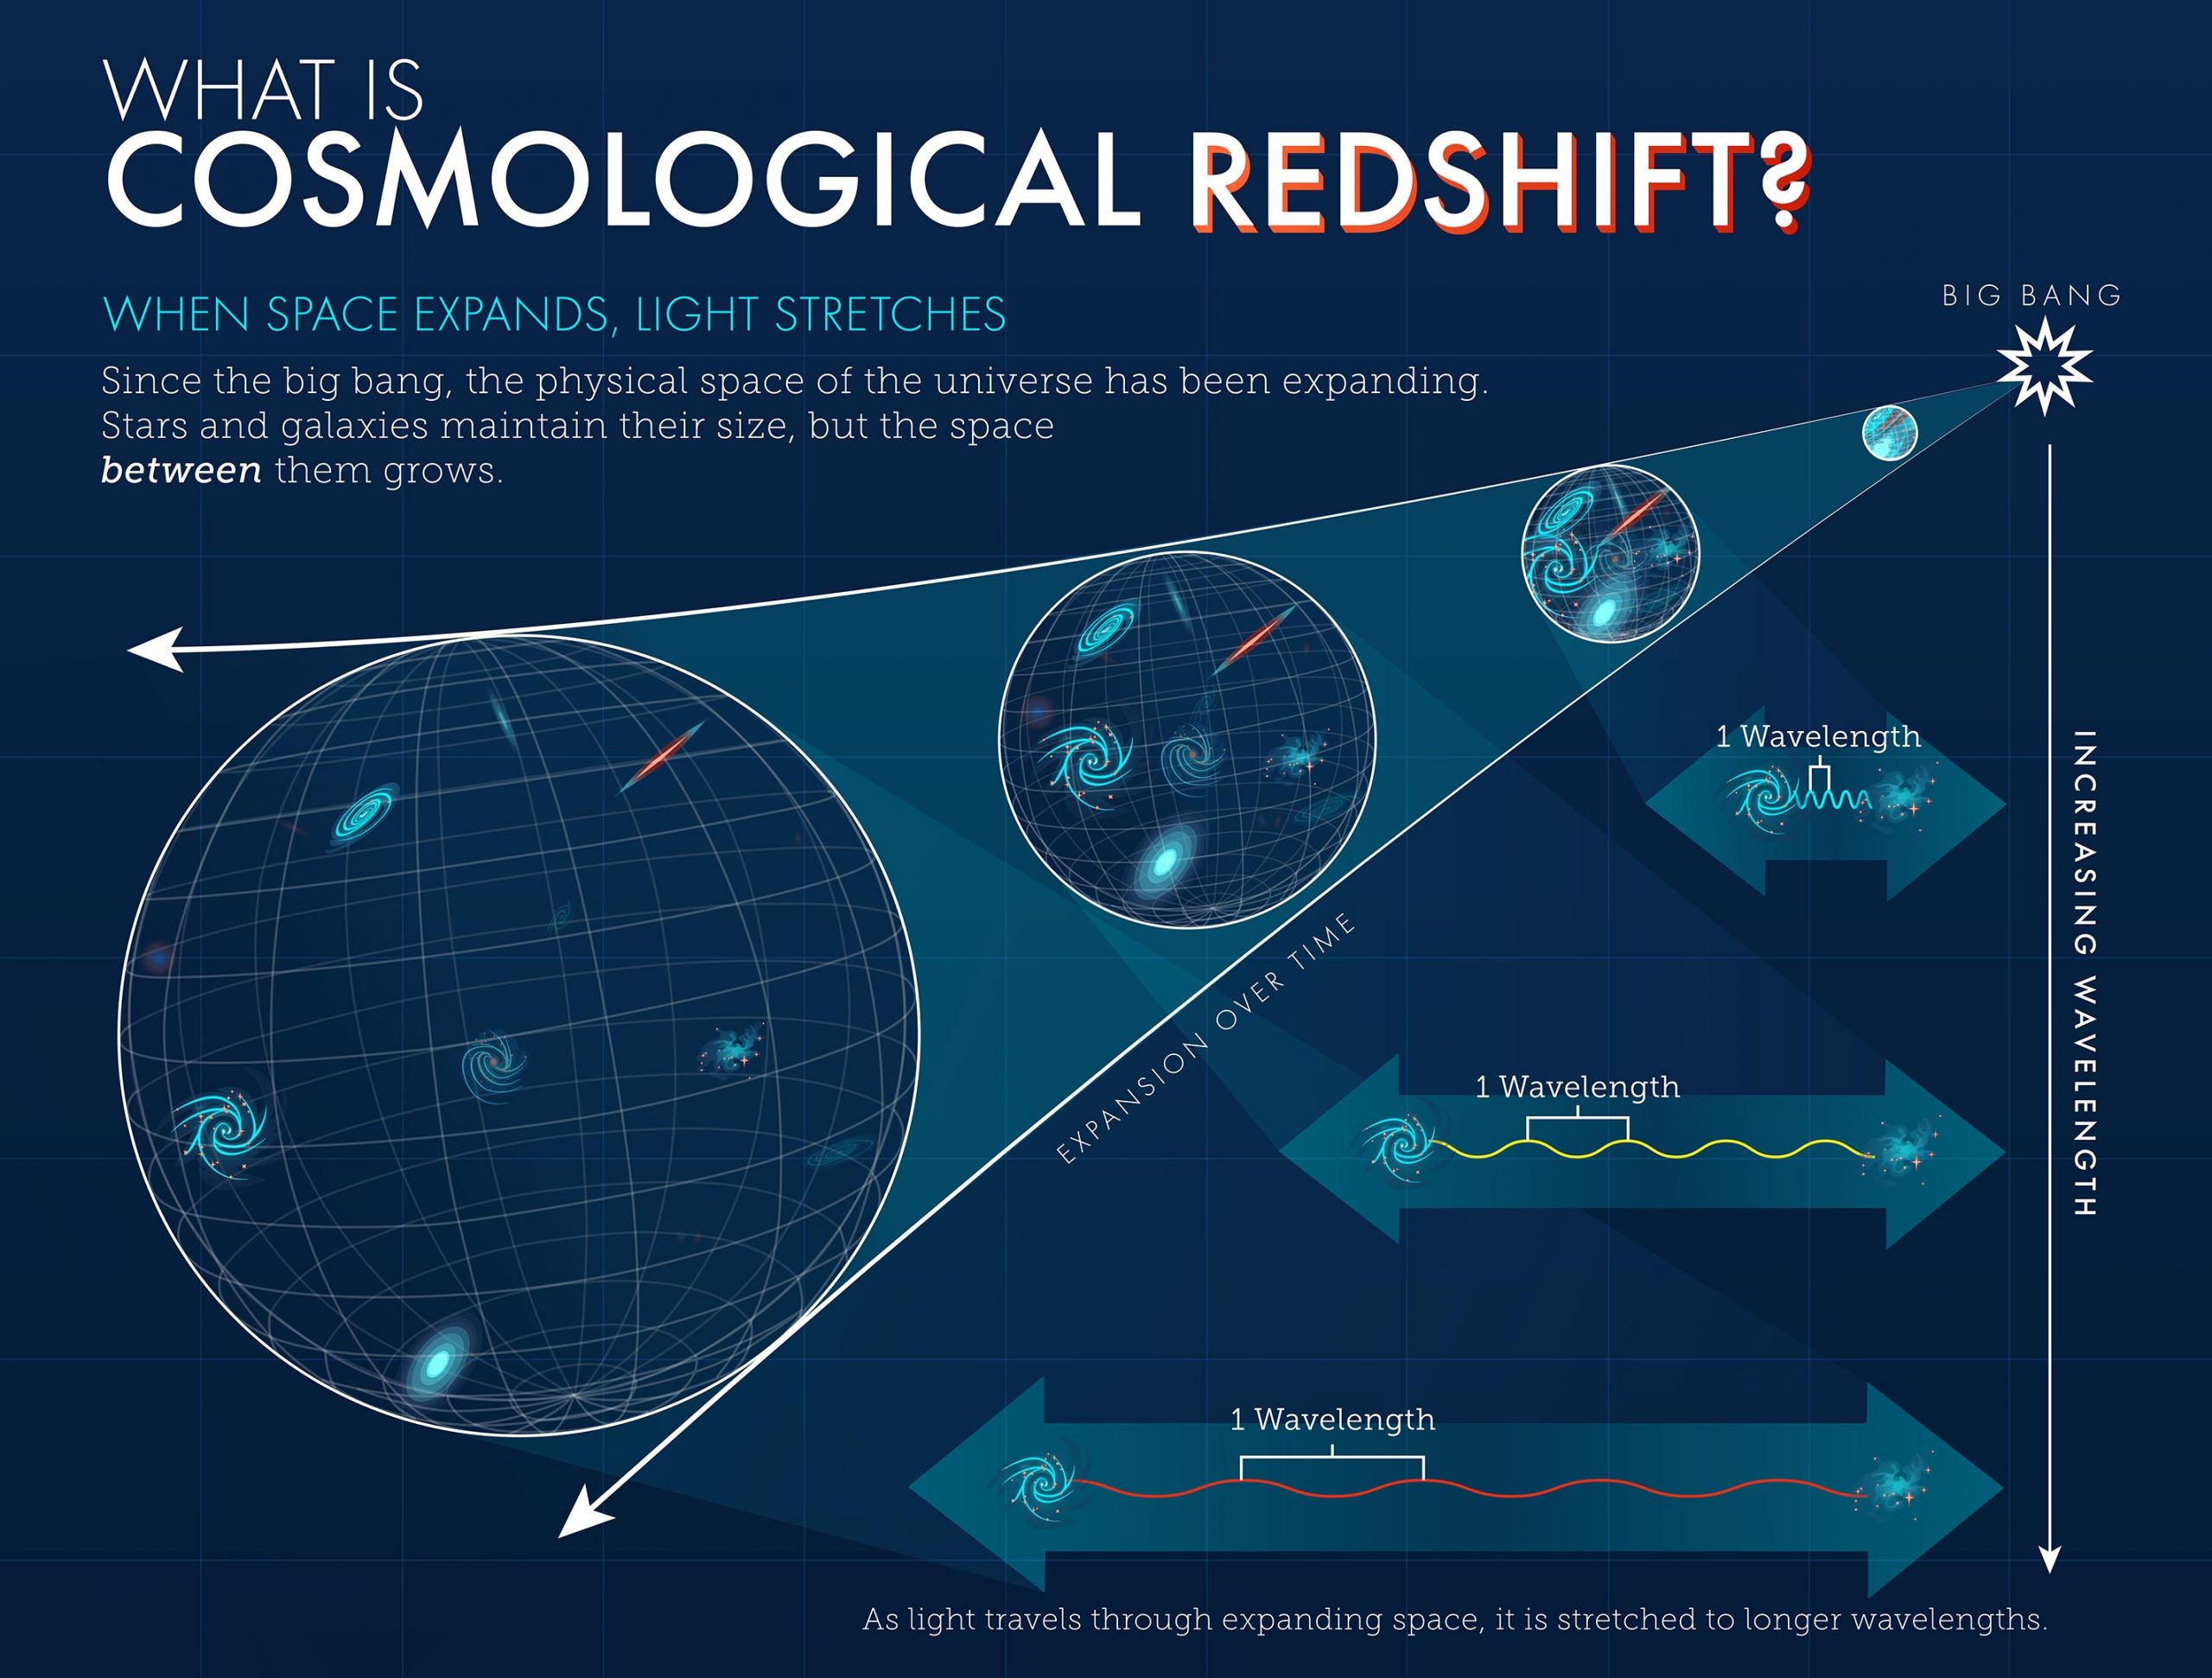 frost vant kommentar Astronomy & Astrophysics 101: What Is “Redshift?”